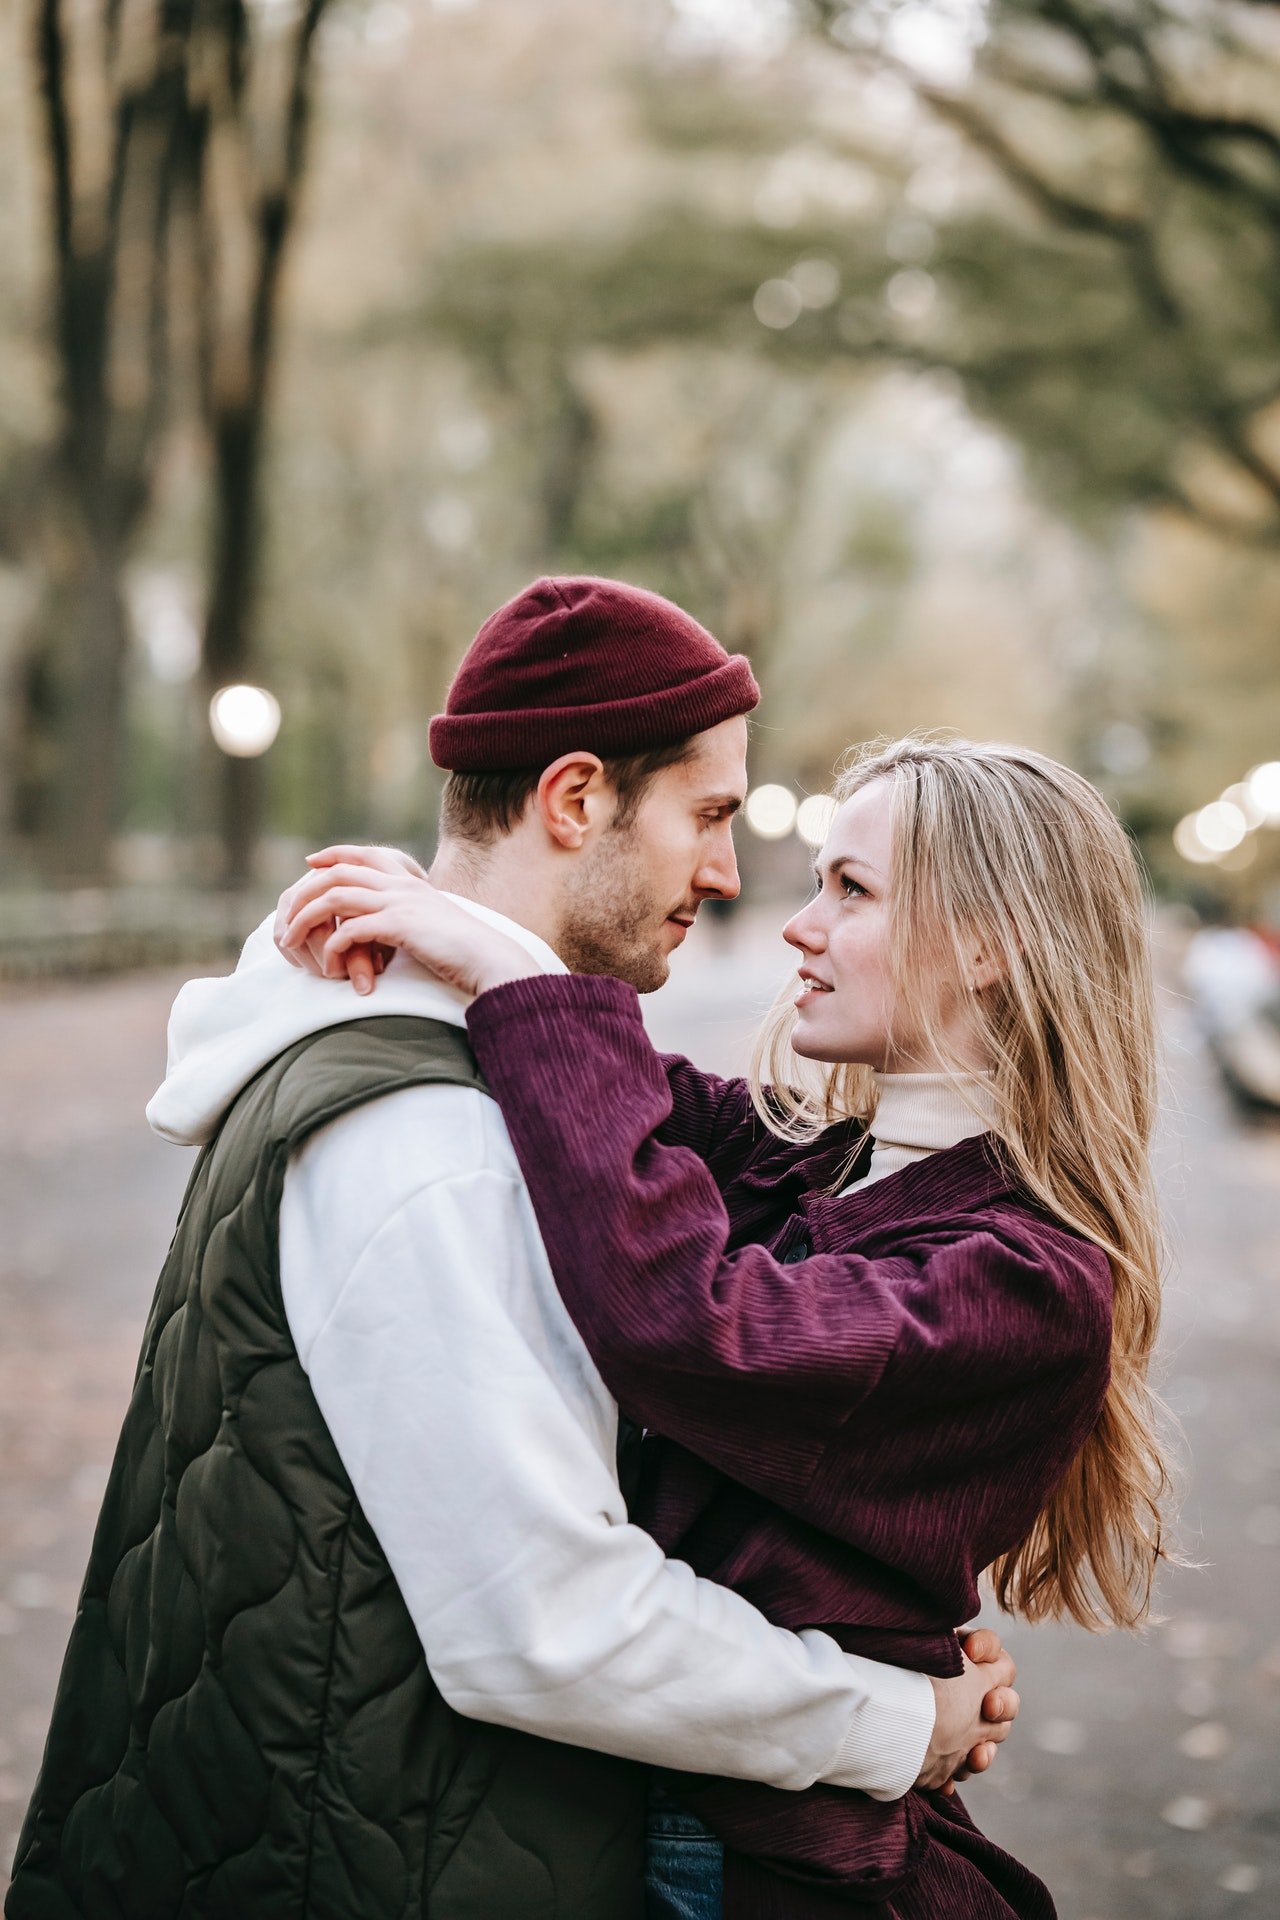 Photo of a couple hugging each other | Photo: Pexels